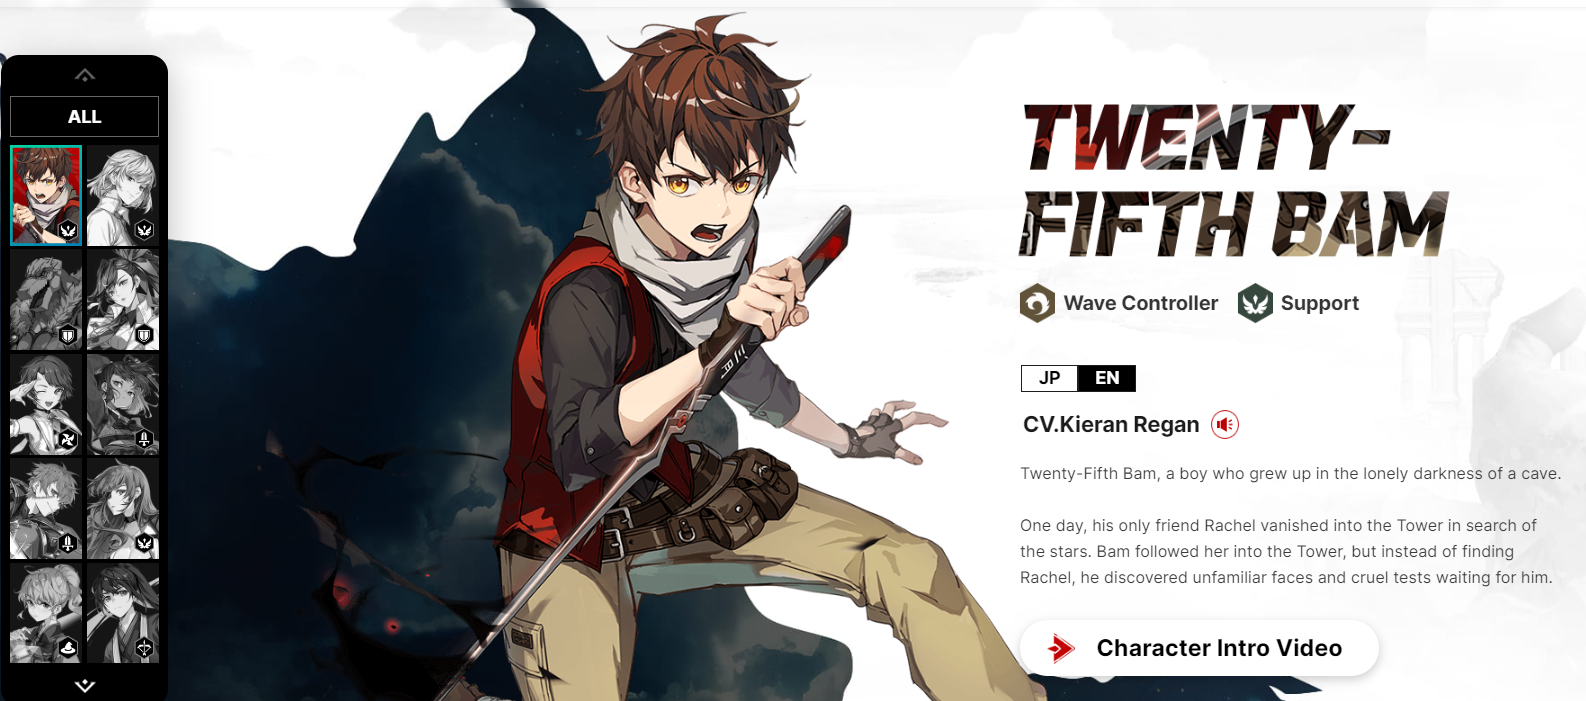 4.5 billion views! Meet the Tower of God characters